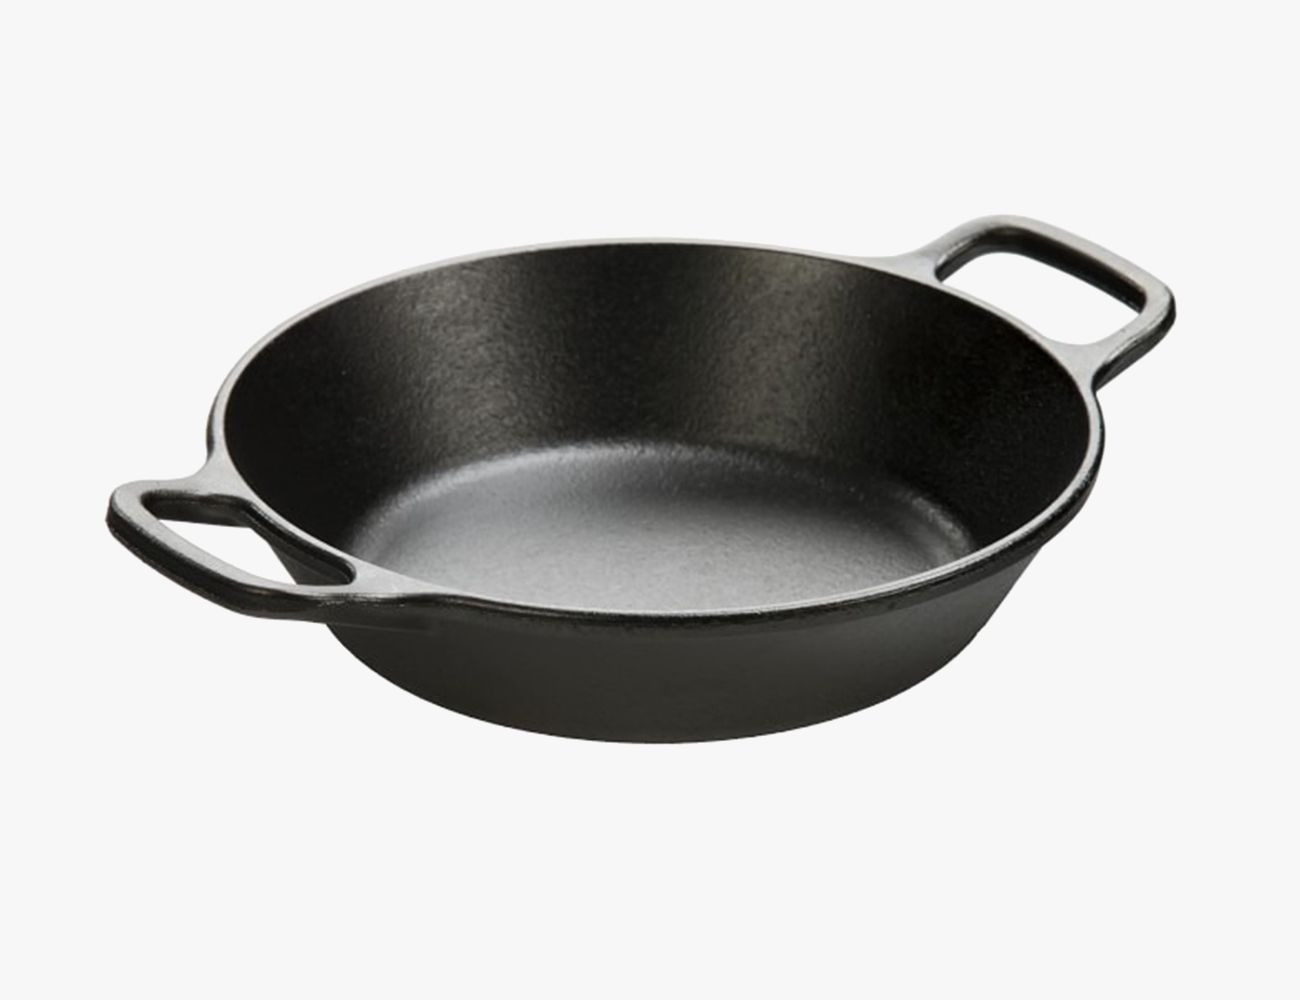 Lodge 9 In. Seasoned Cast Iron Pie Pan with Dual Handles - Anderson Lumber